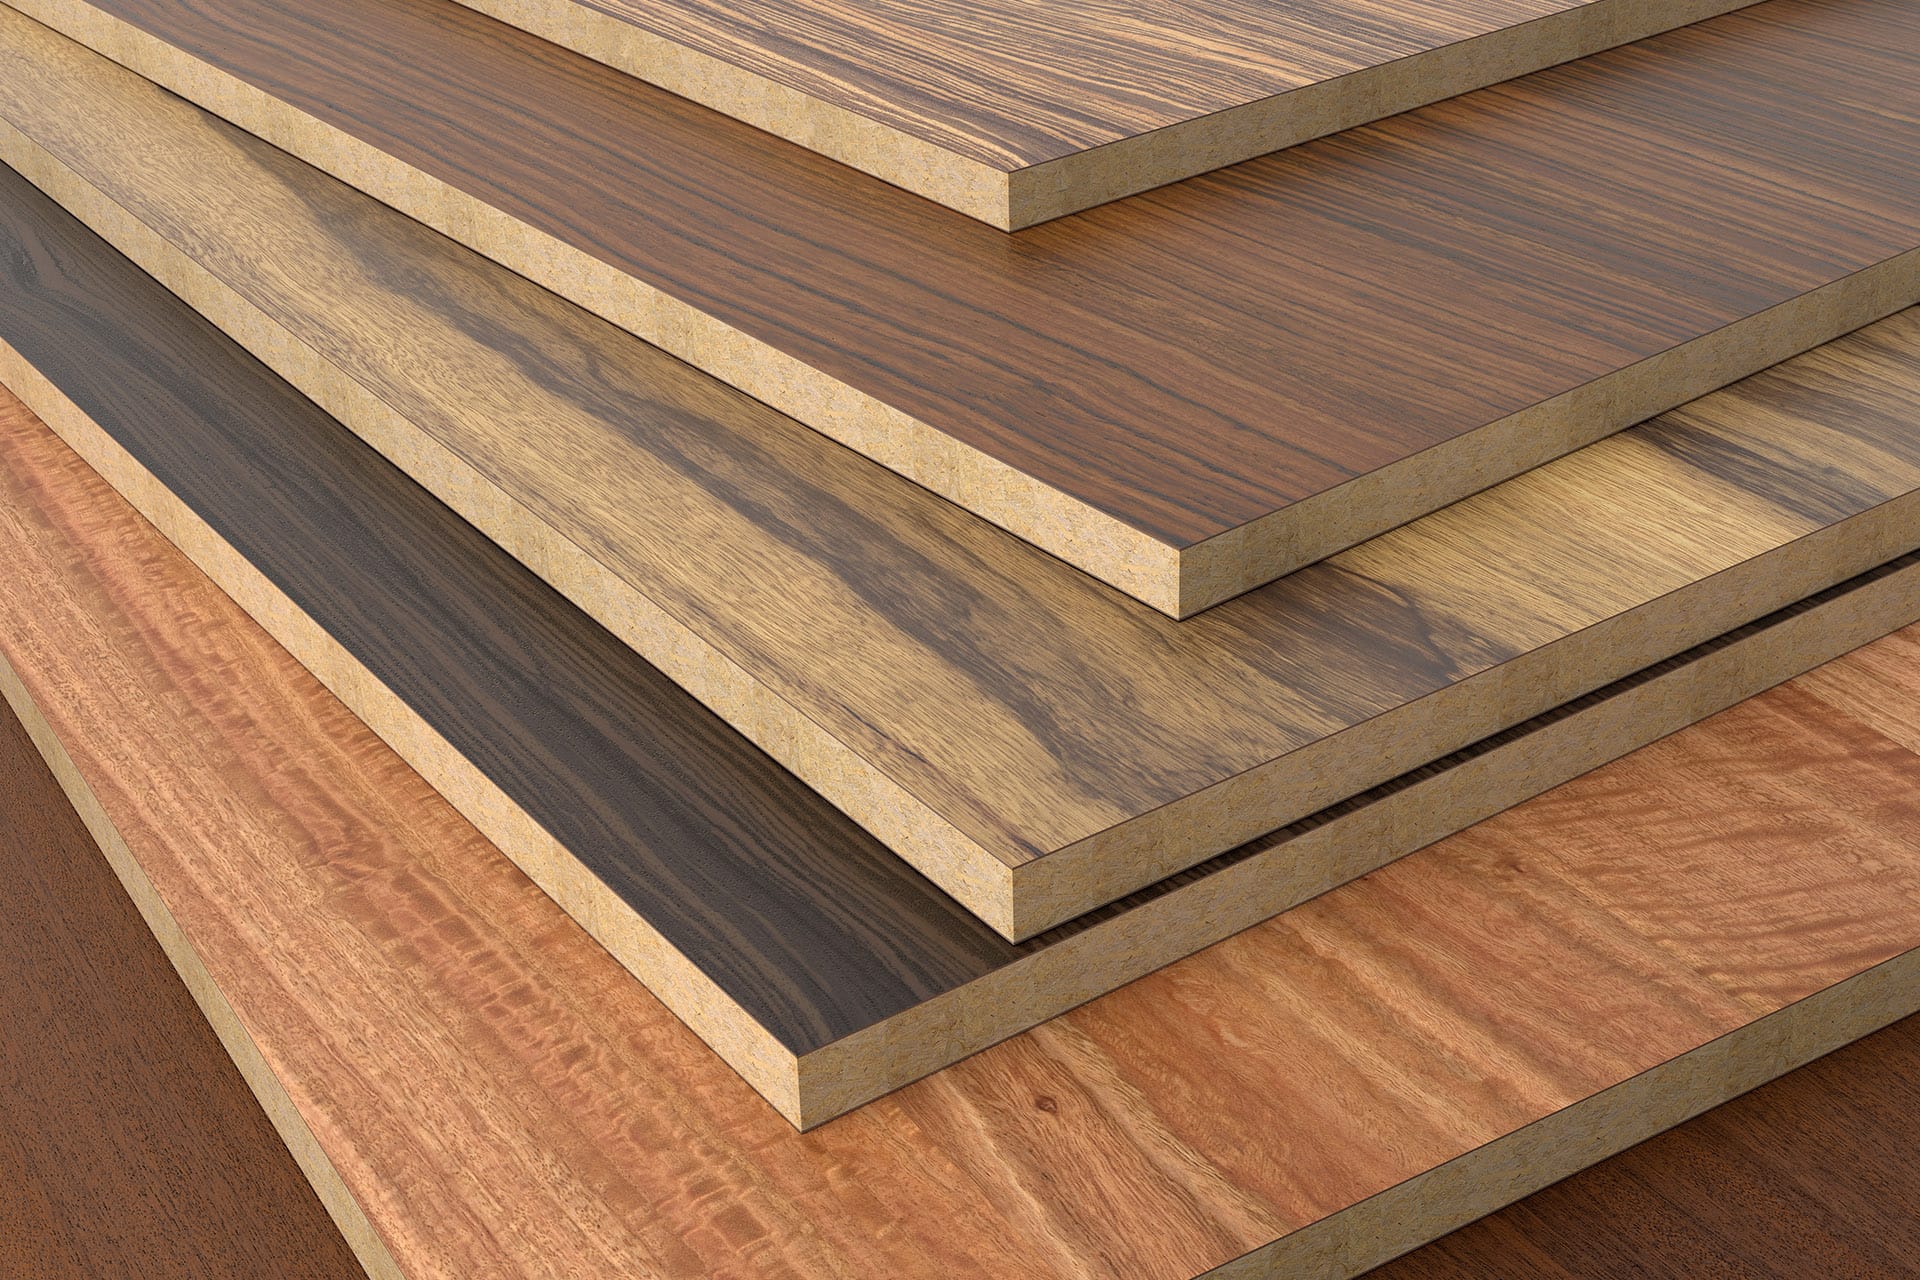 specialist sheets boards - hardwood and softwood sheet materials